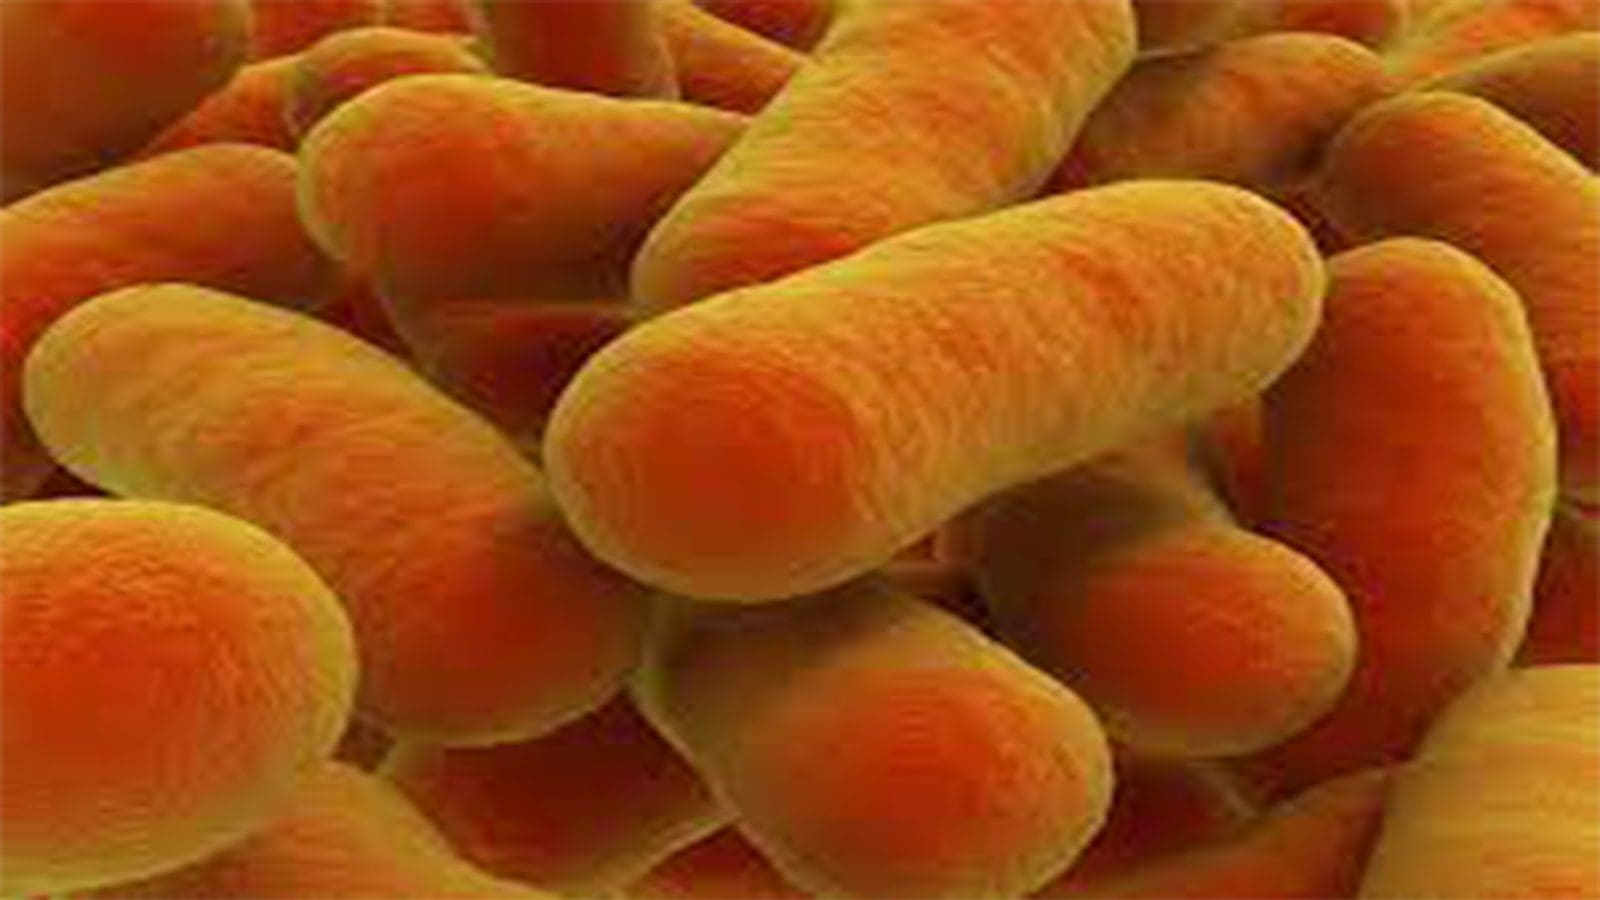 Officials in Argentina prioritize botulism, E. coli outbreaks